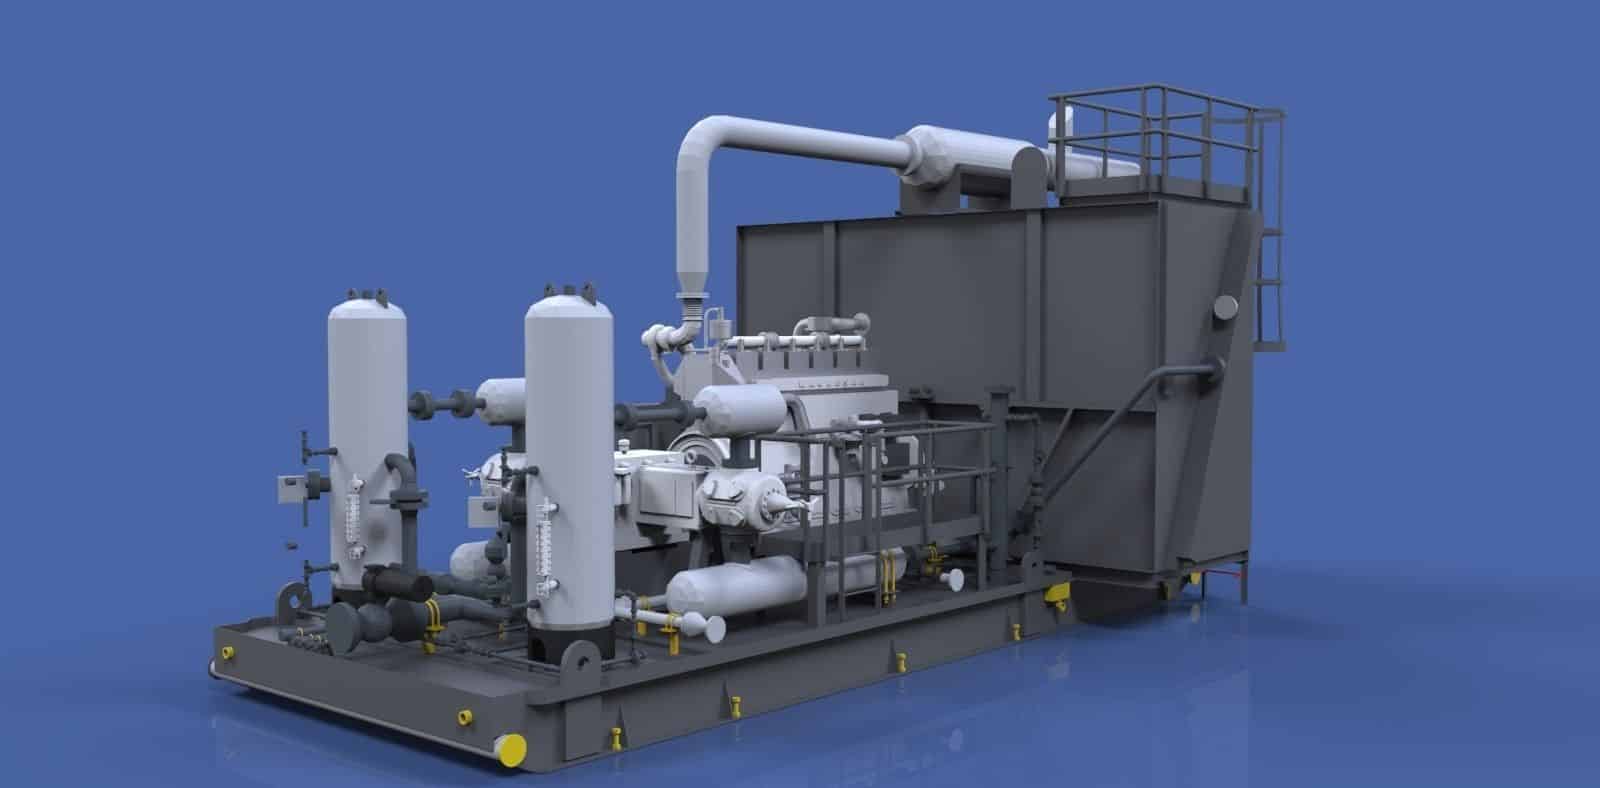 A 3d model of a large industrial machine.